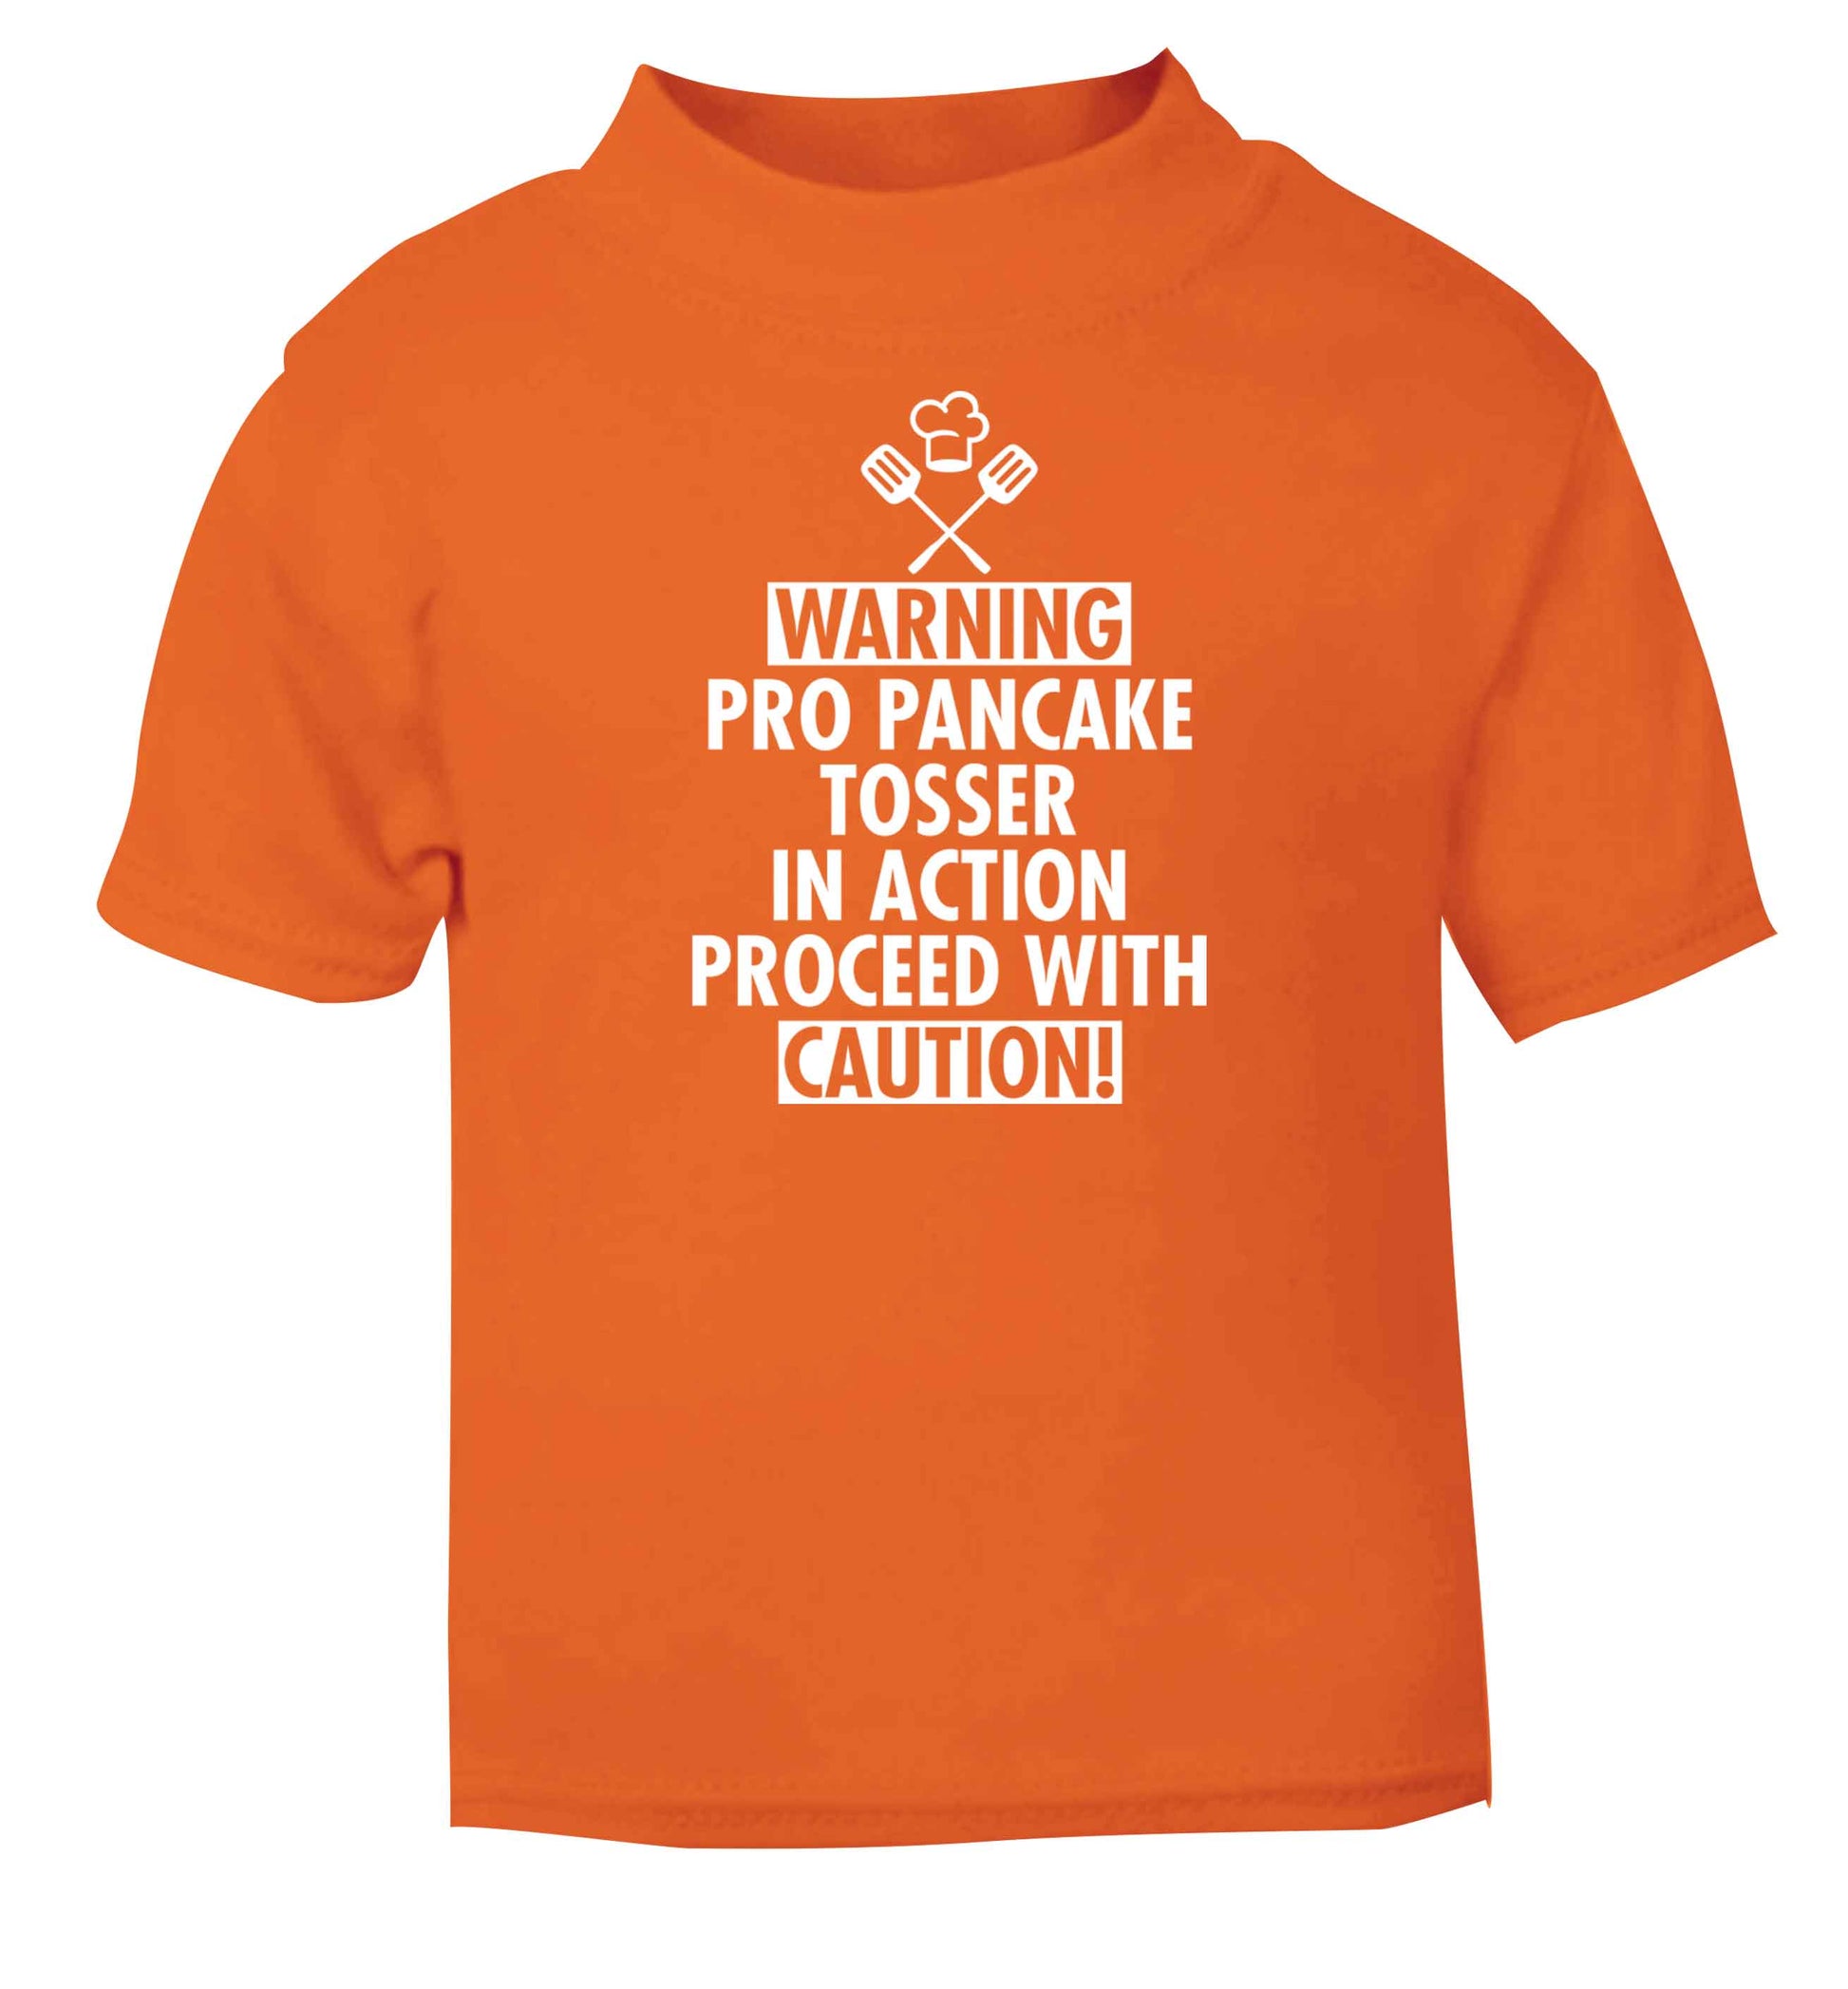 Warning pro pancake tosser in action proceed with caution orange baby toddler Tshirt 2 Years